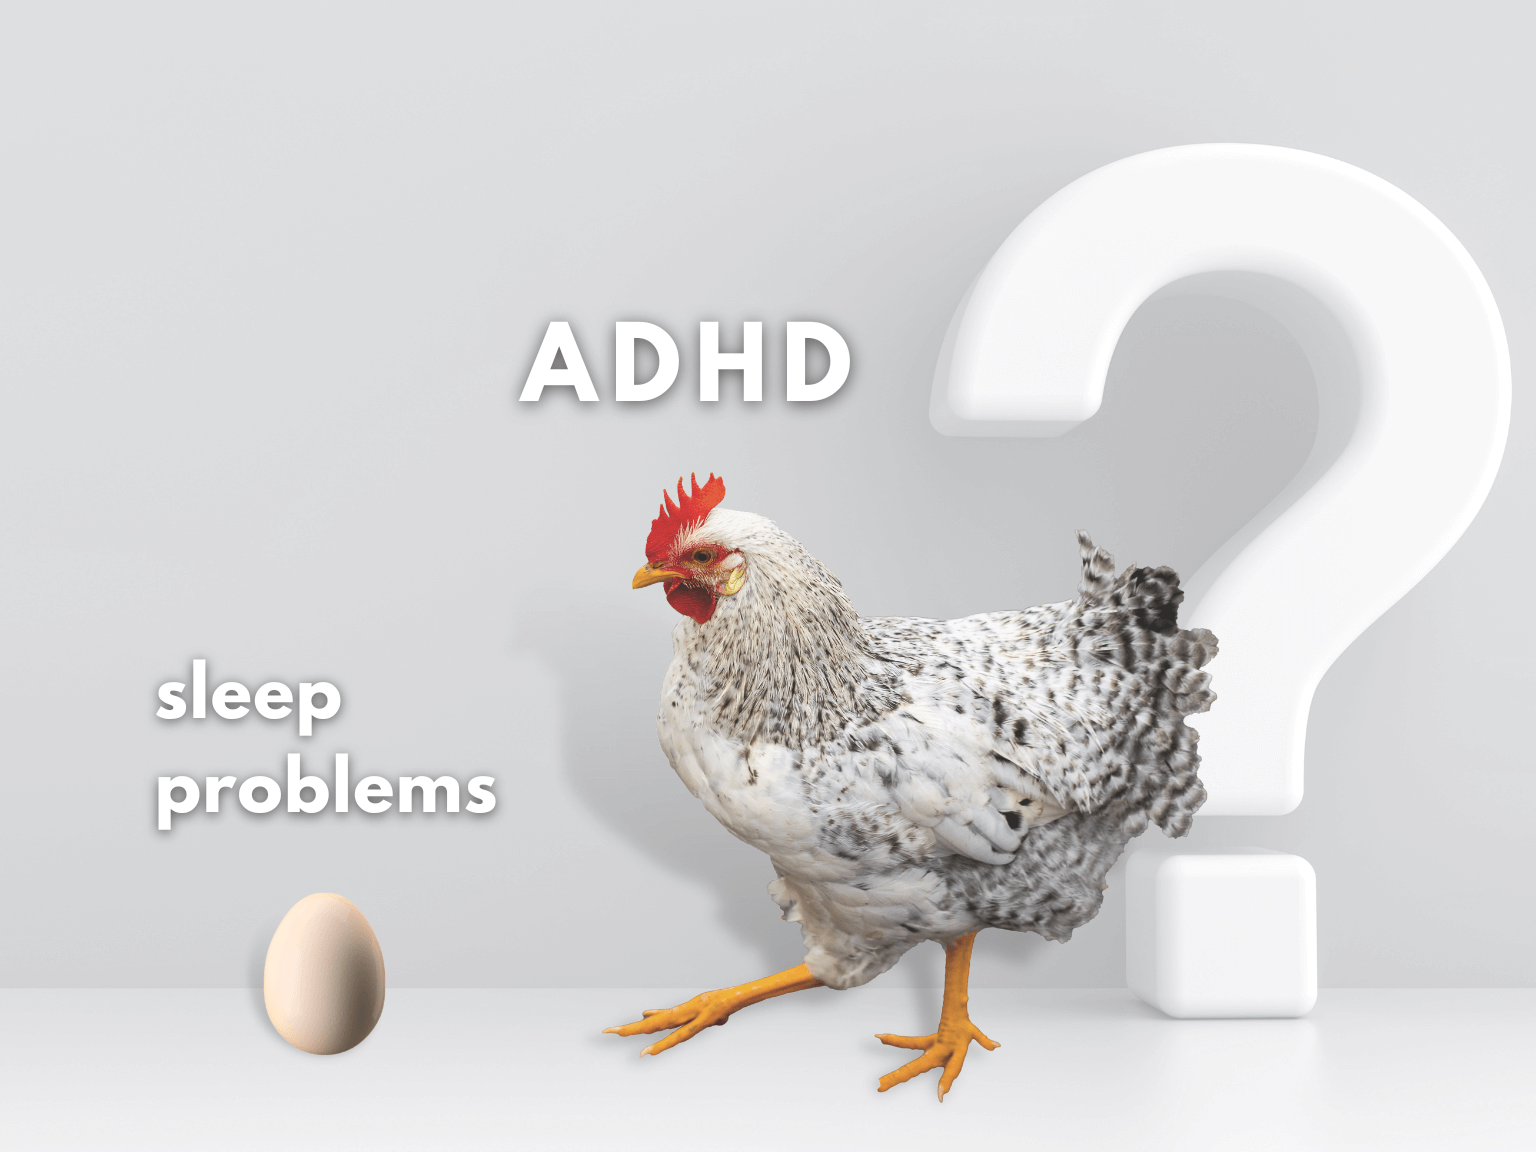 Which came first? The chicken or the egg? Depicted as a photo with a question mark. The chicken is labeled as ADHD and the egg as sleep problems.